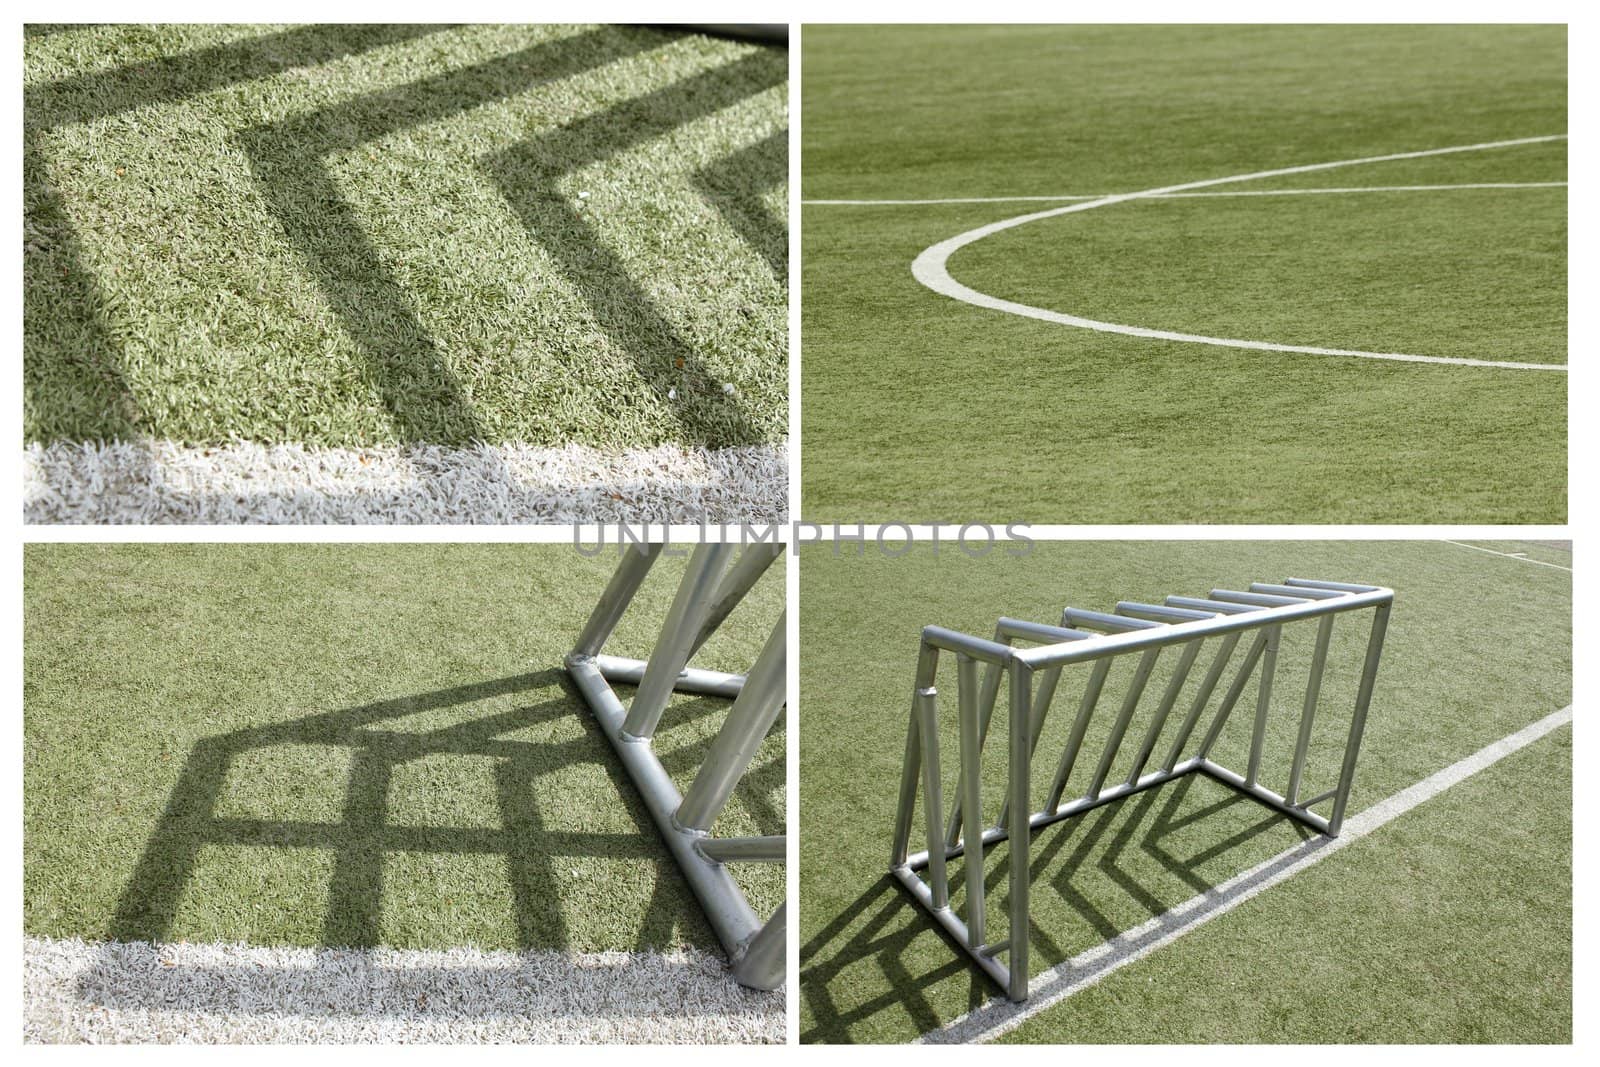 football goal collage by Teka77